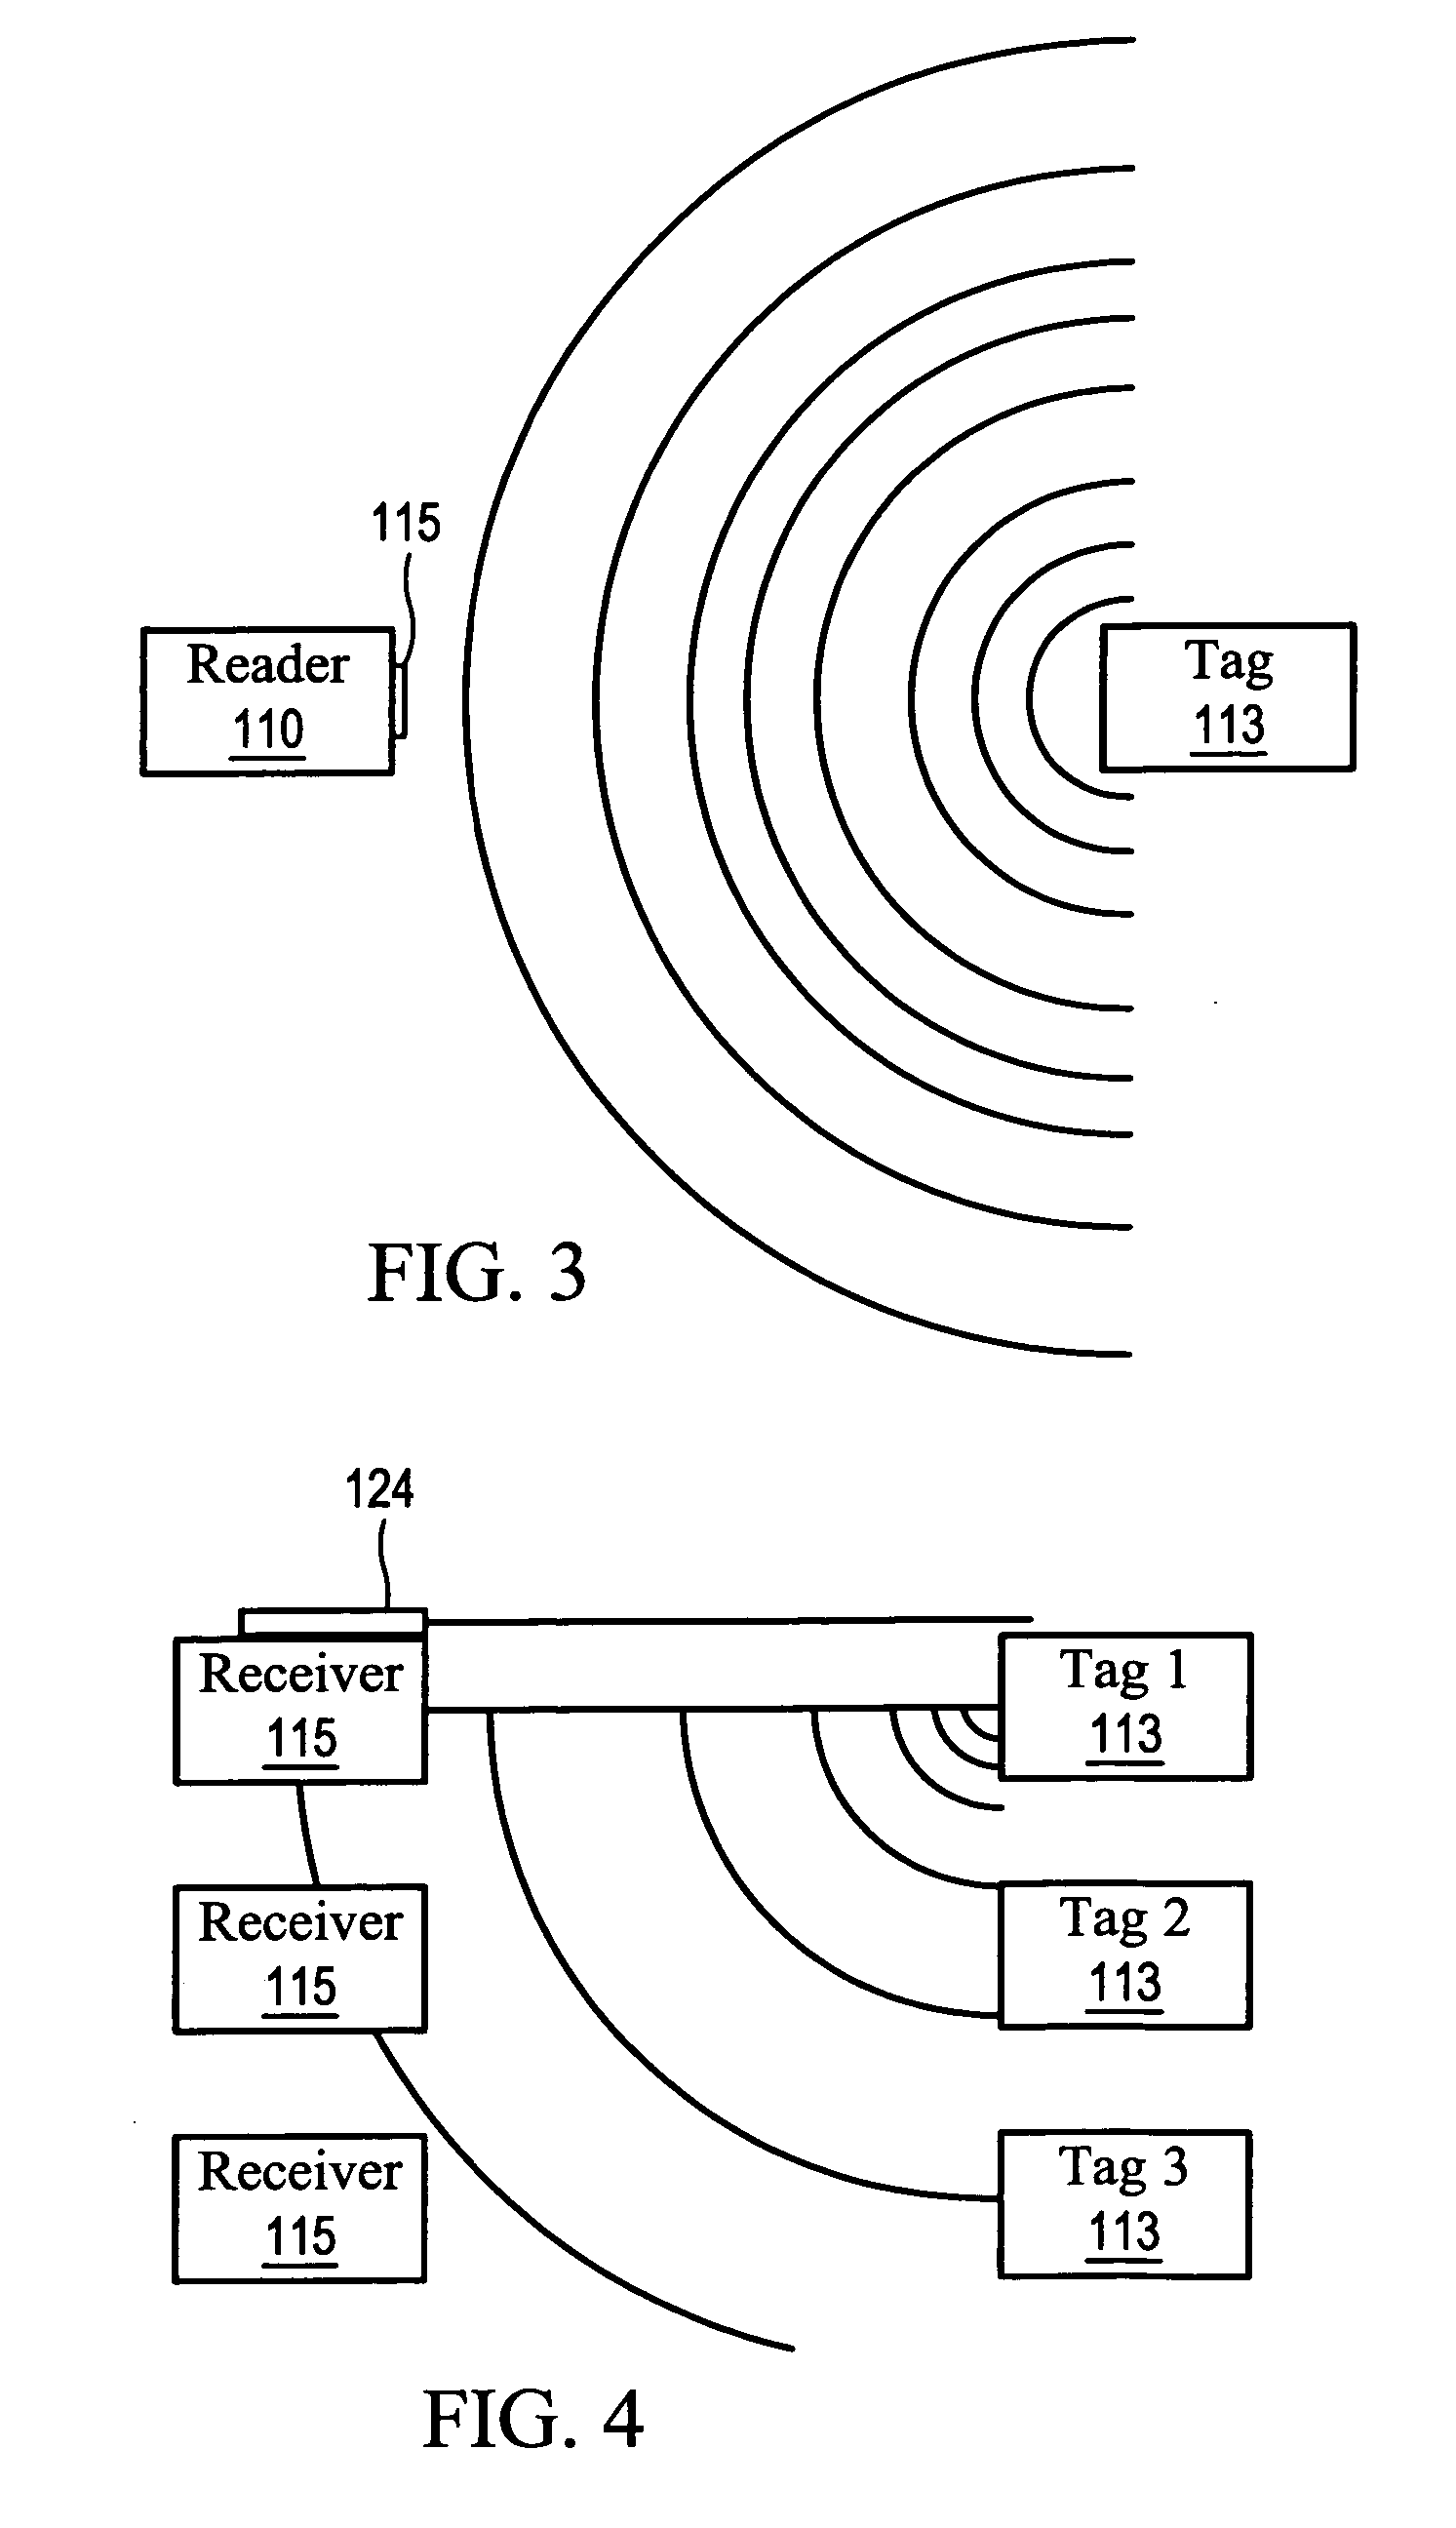 Interactive networking device